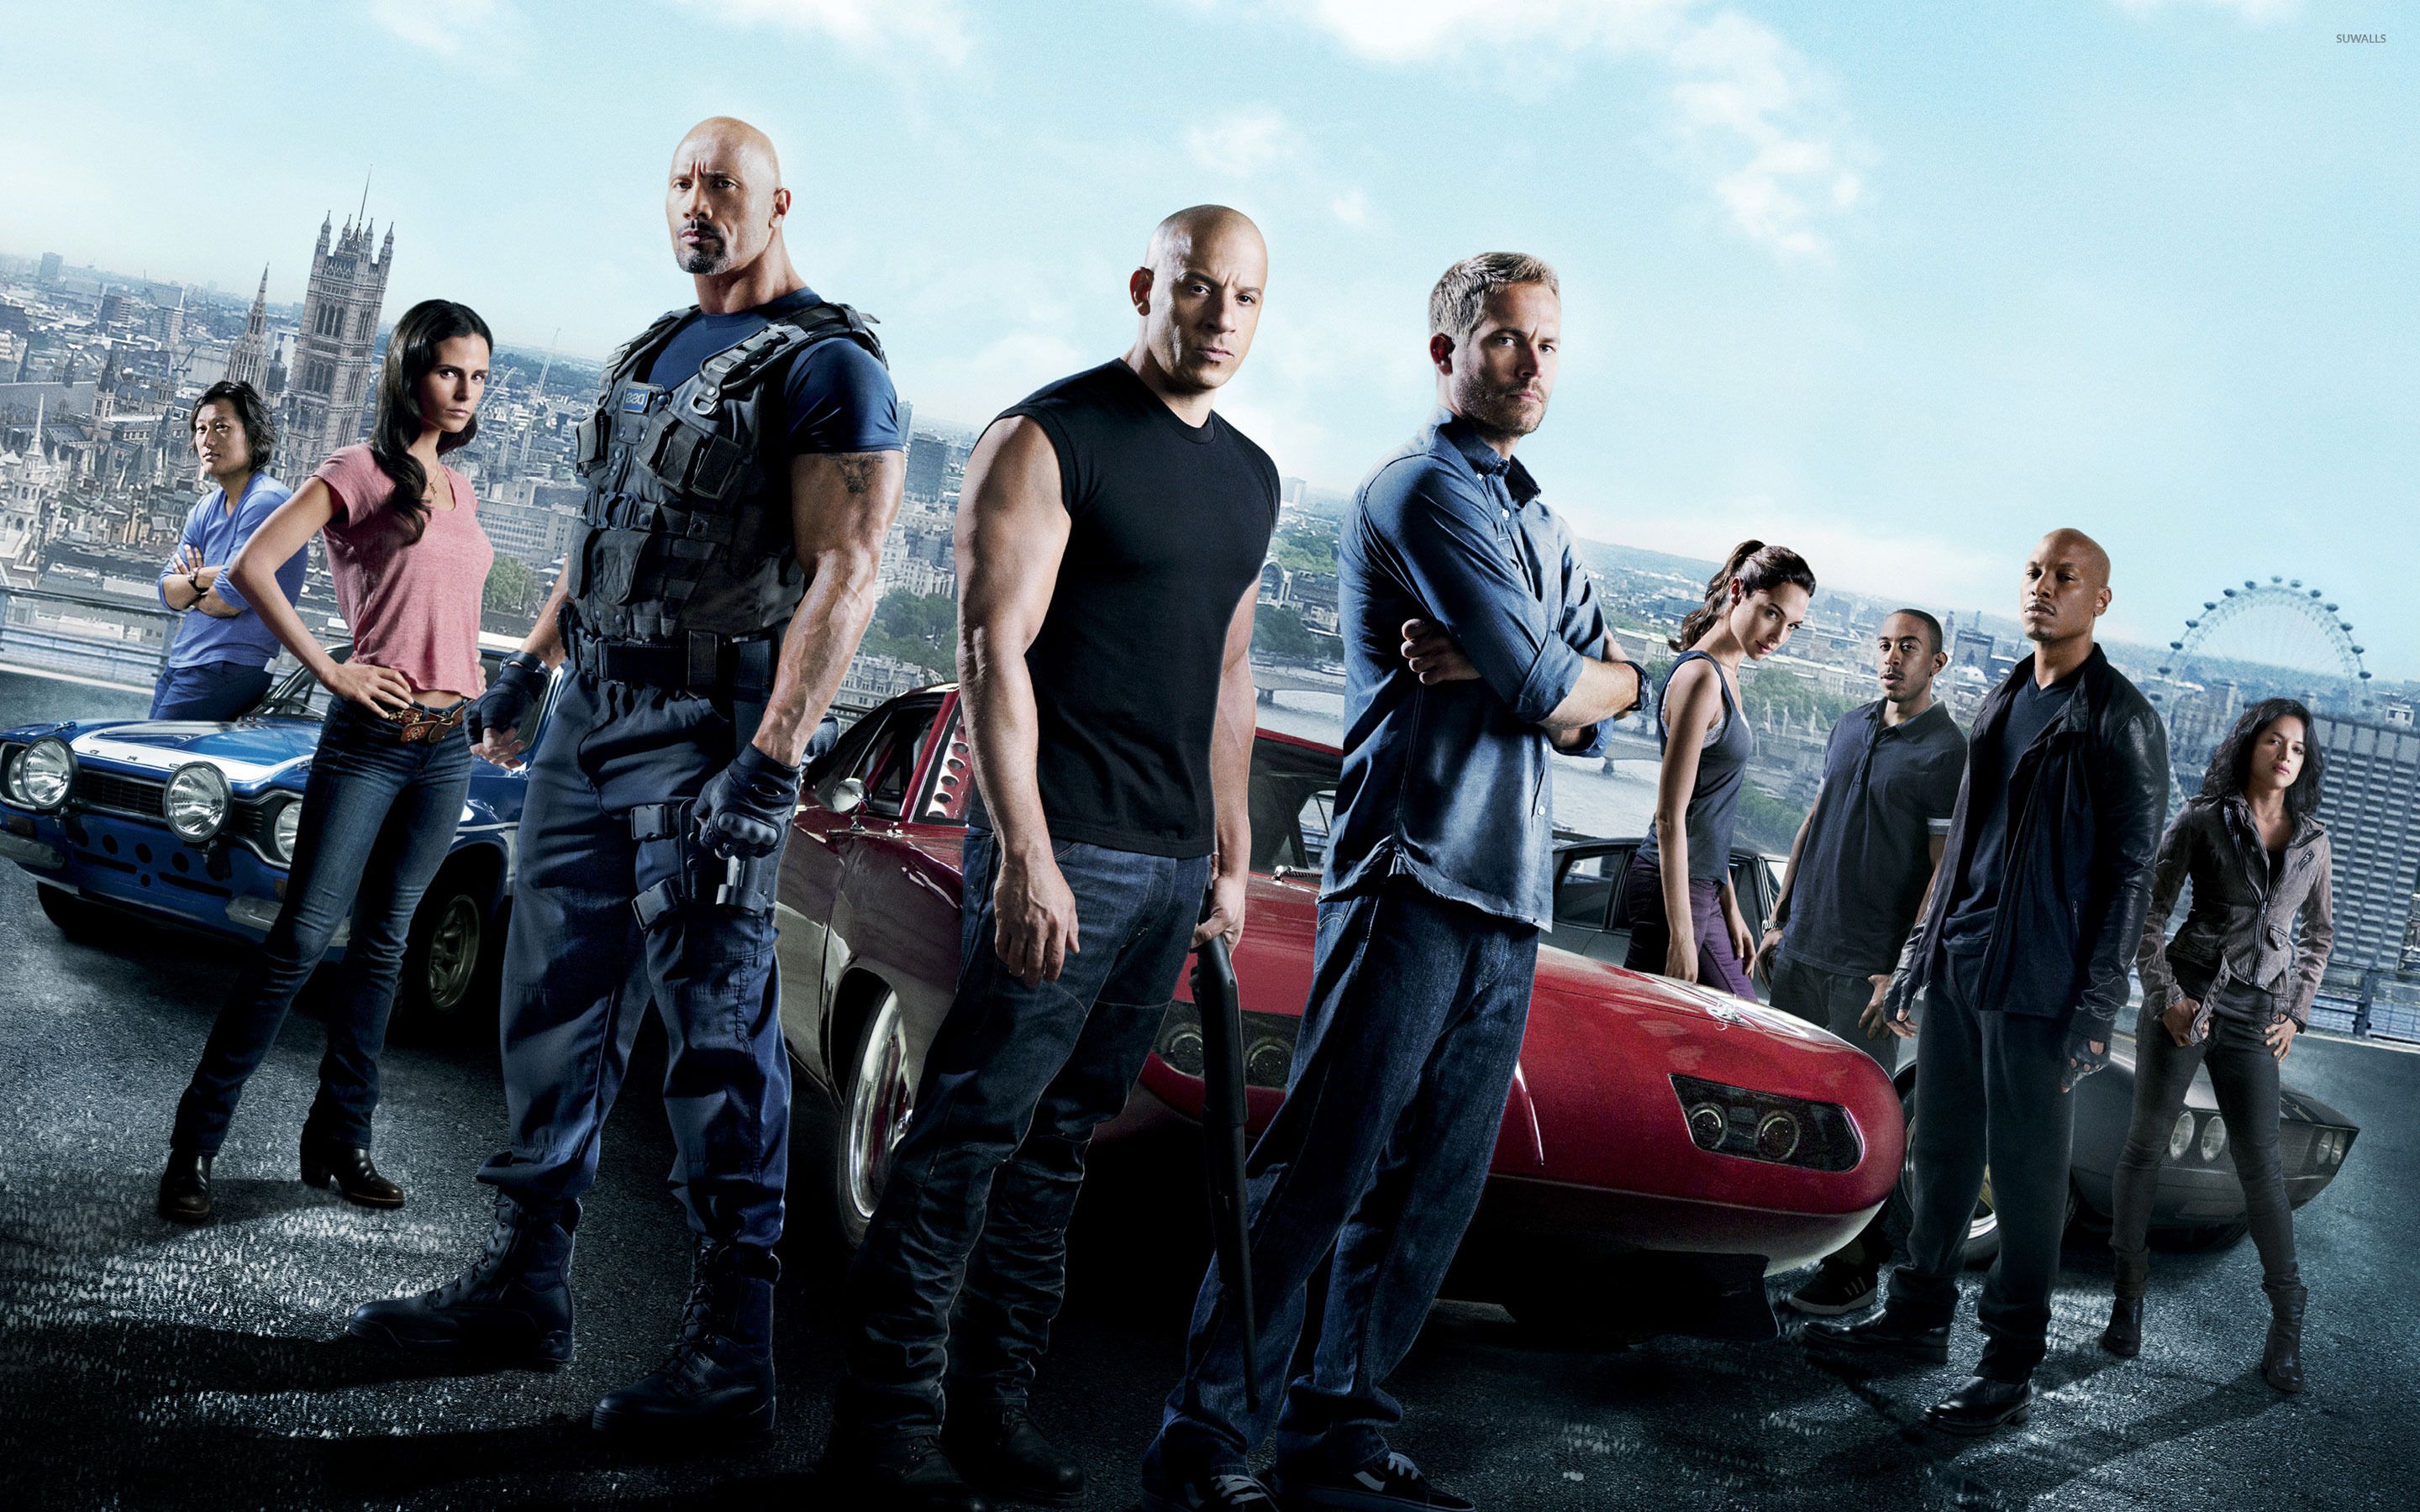 music fast and furious download torrent